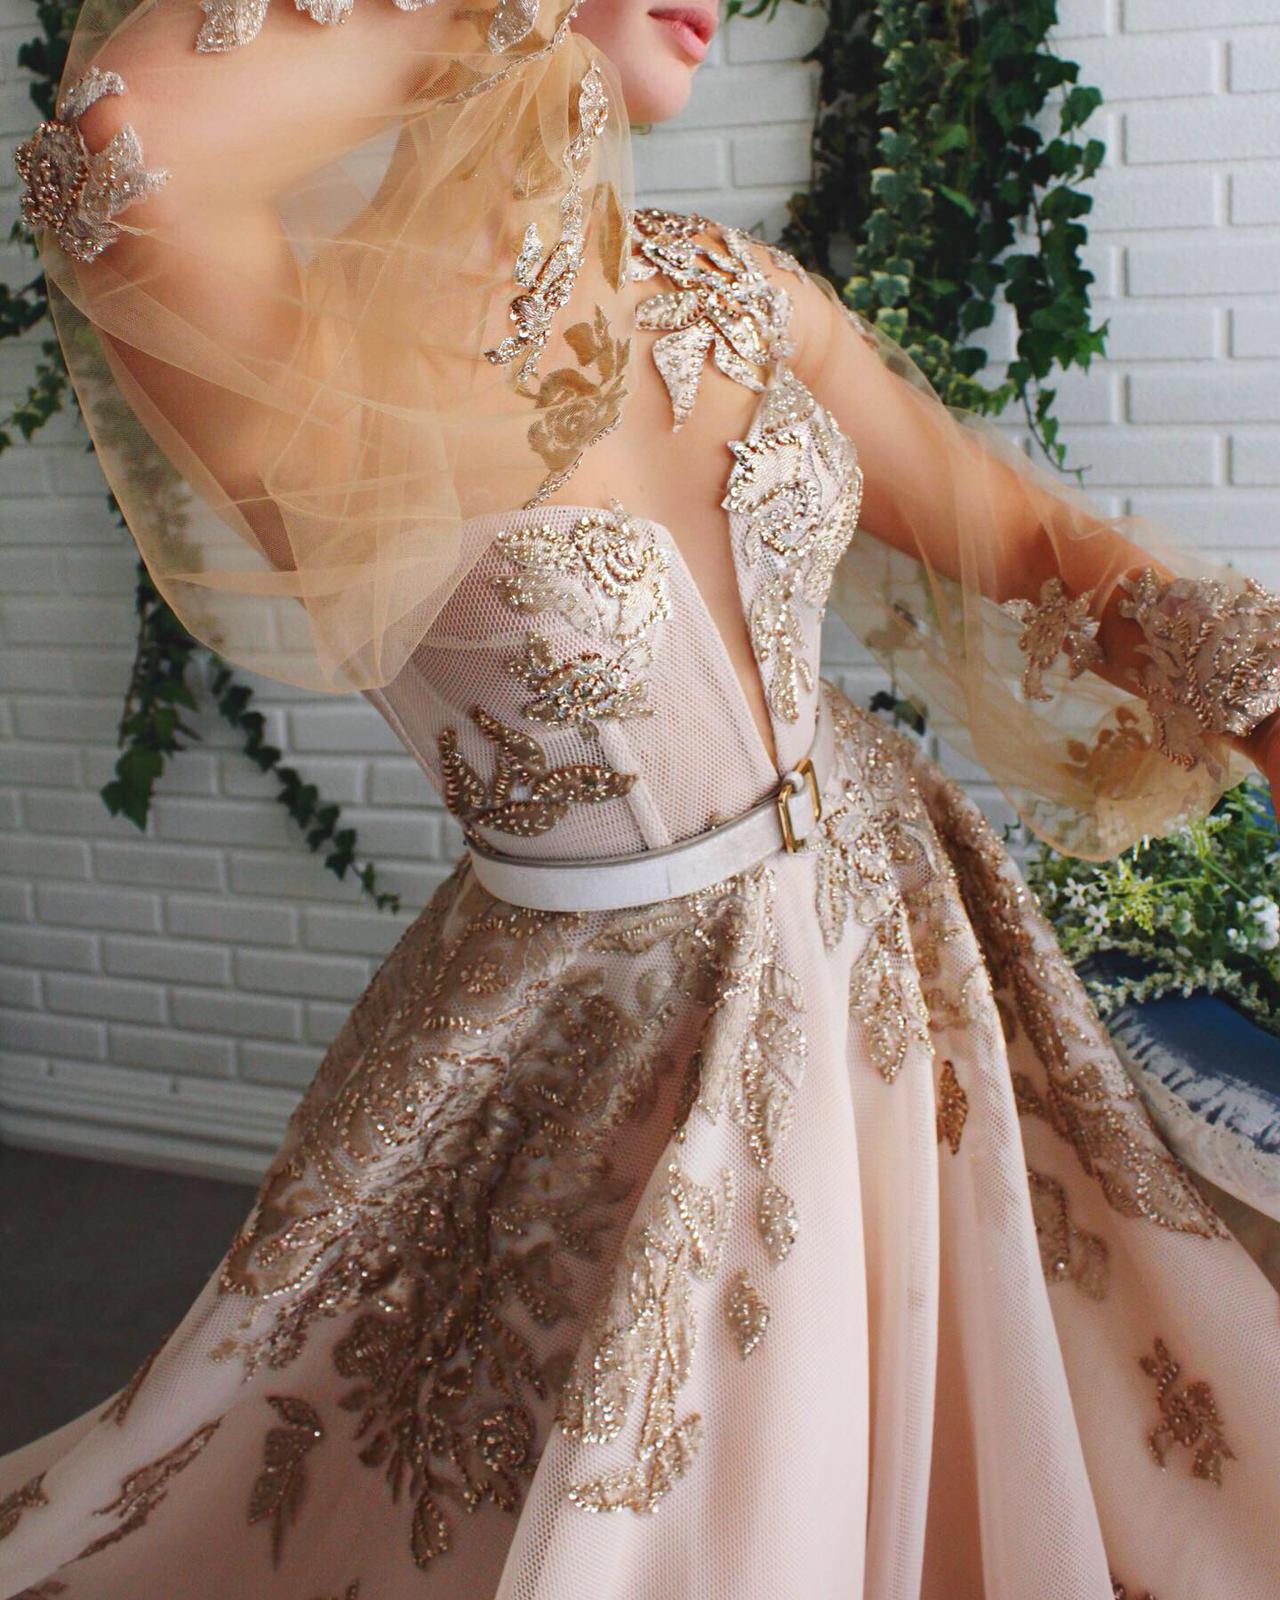 Beige A-Line dress with belt, long sleeves and embroidery